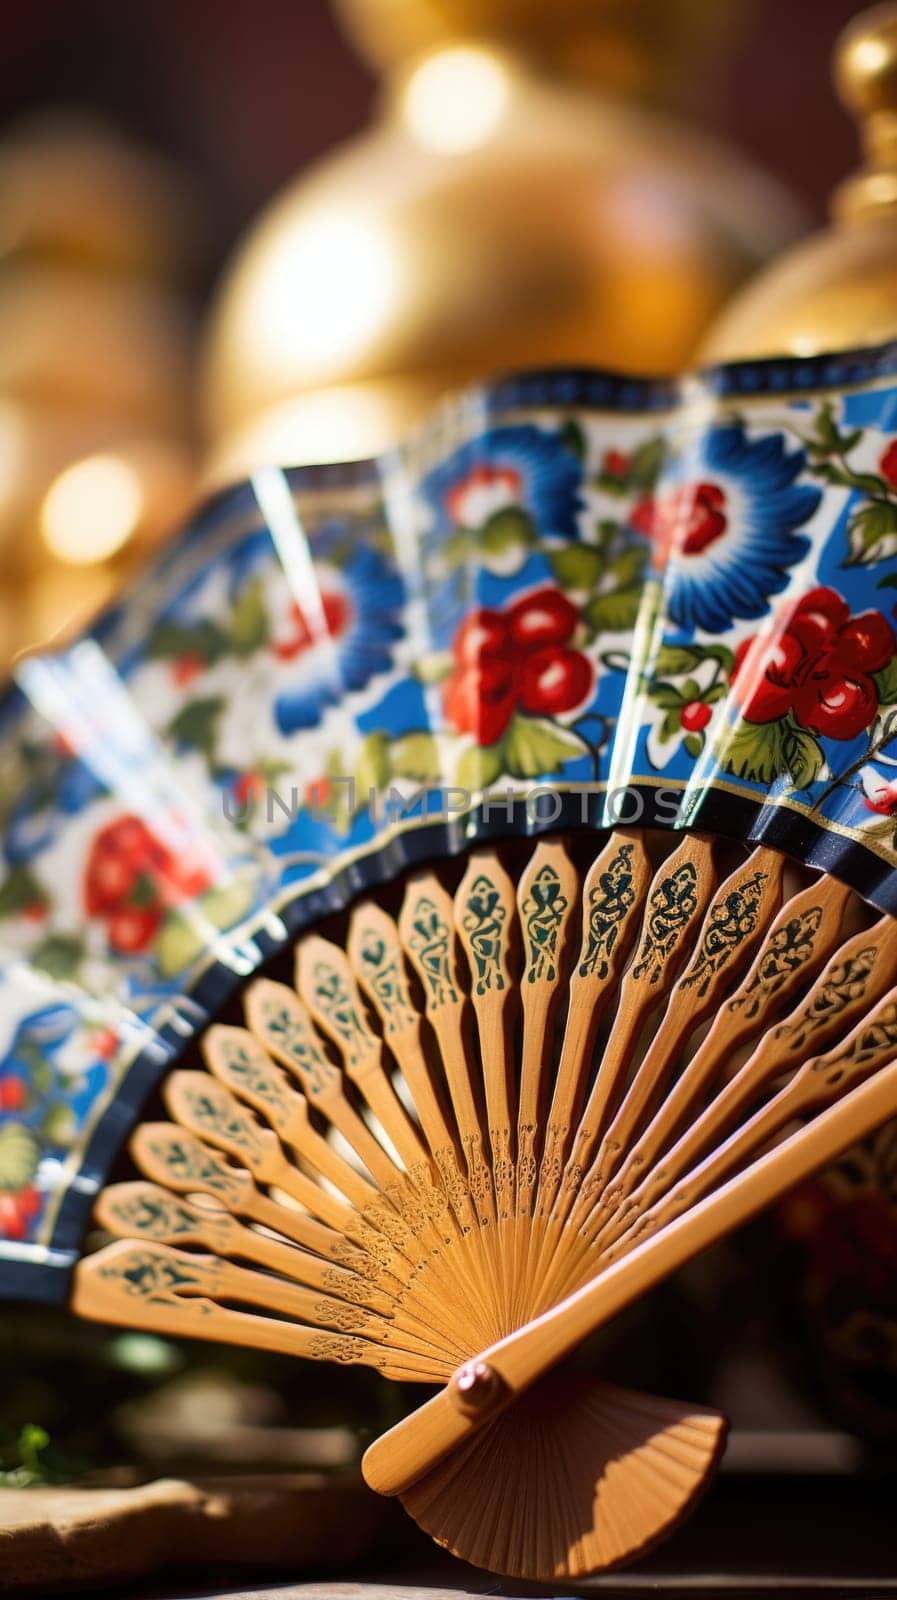 A close up of a fan with colorful designs, AI by starush